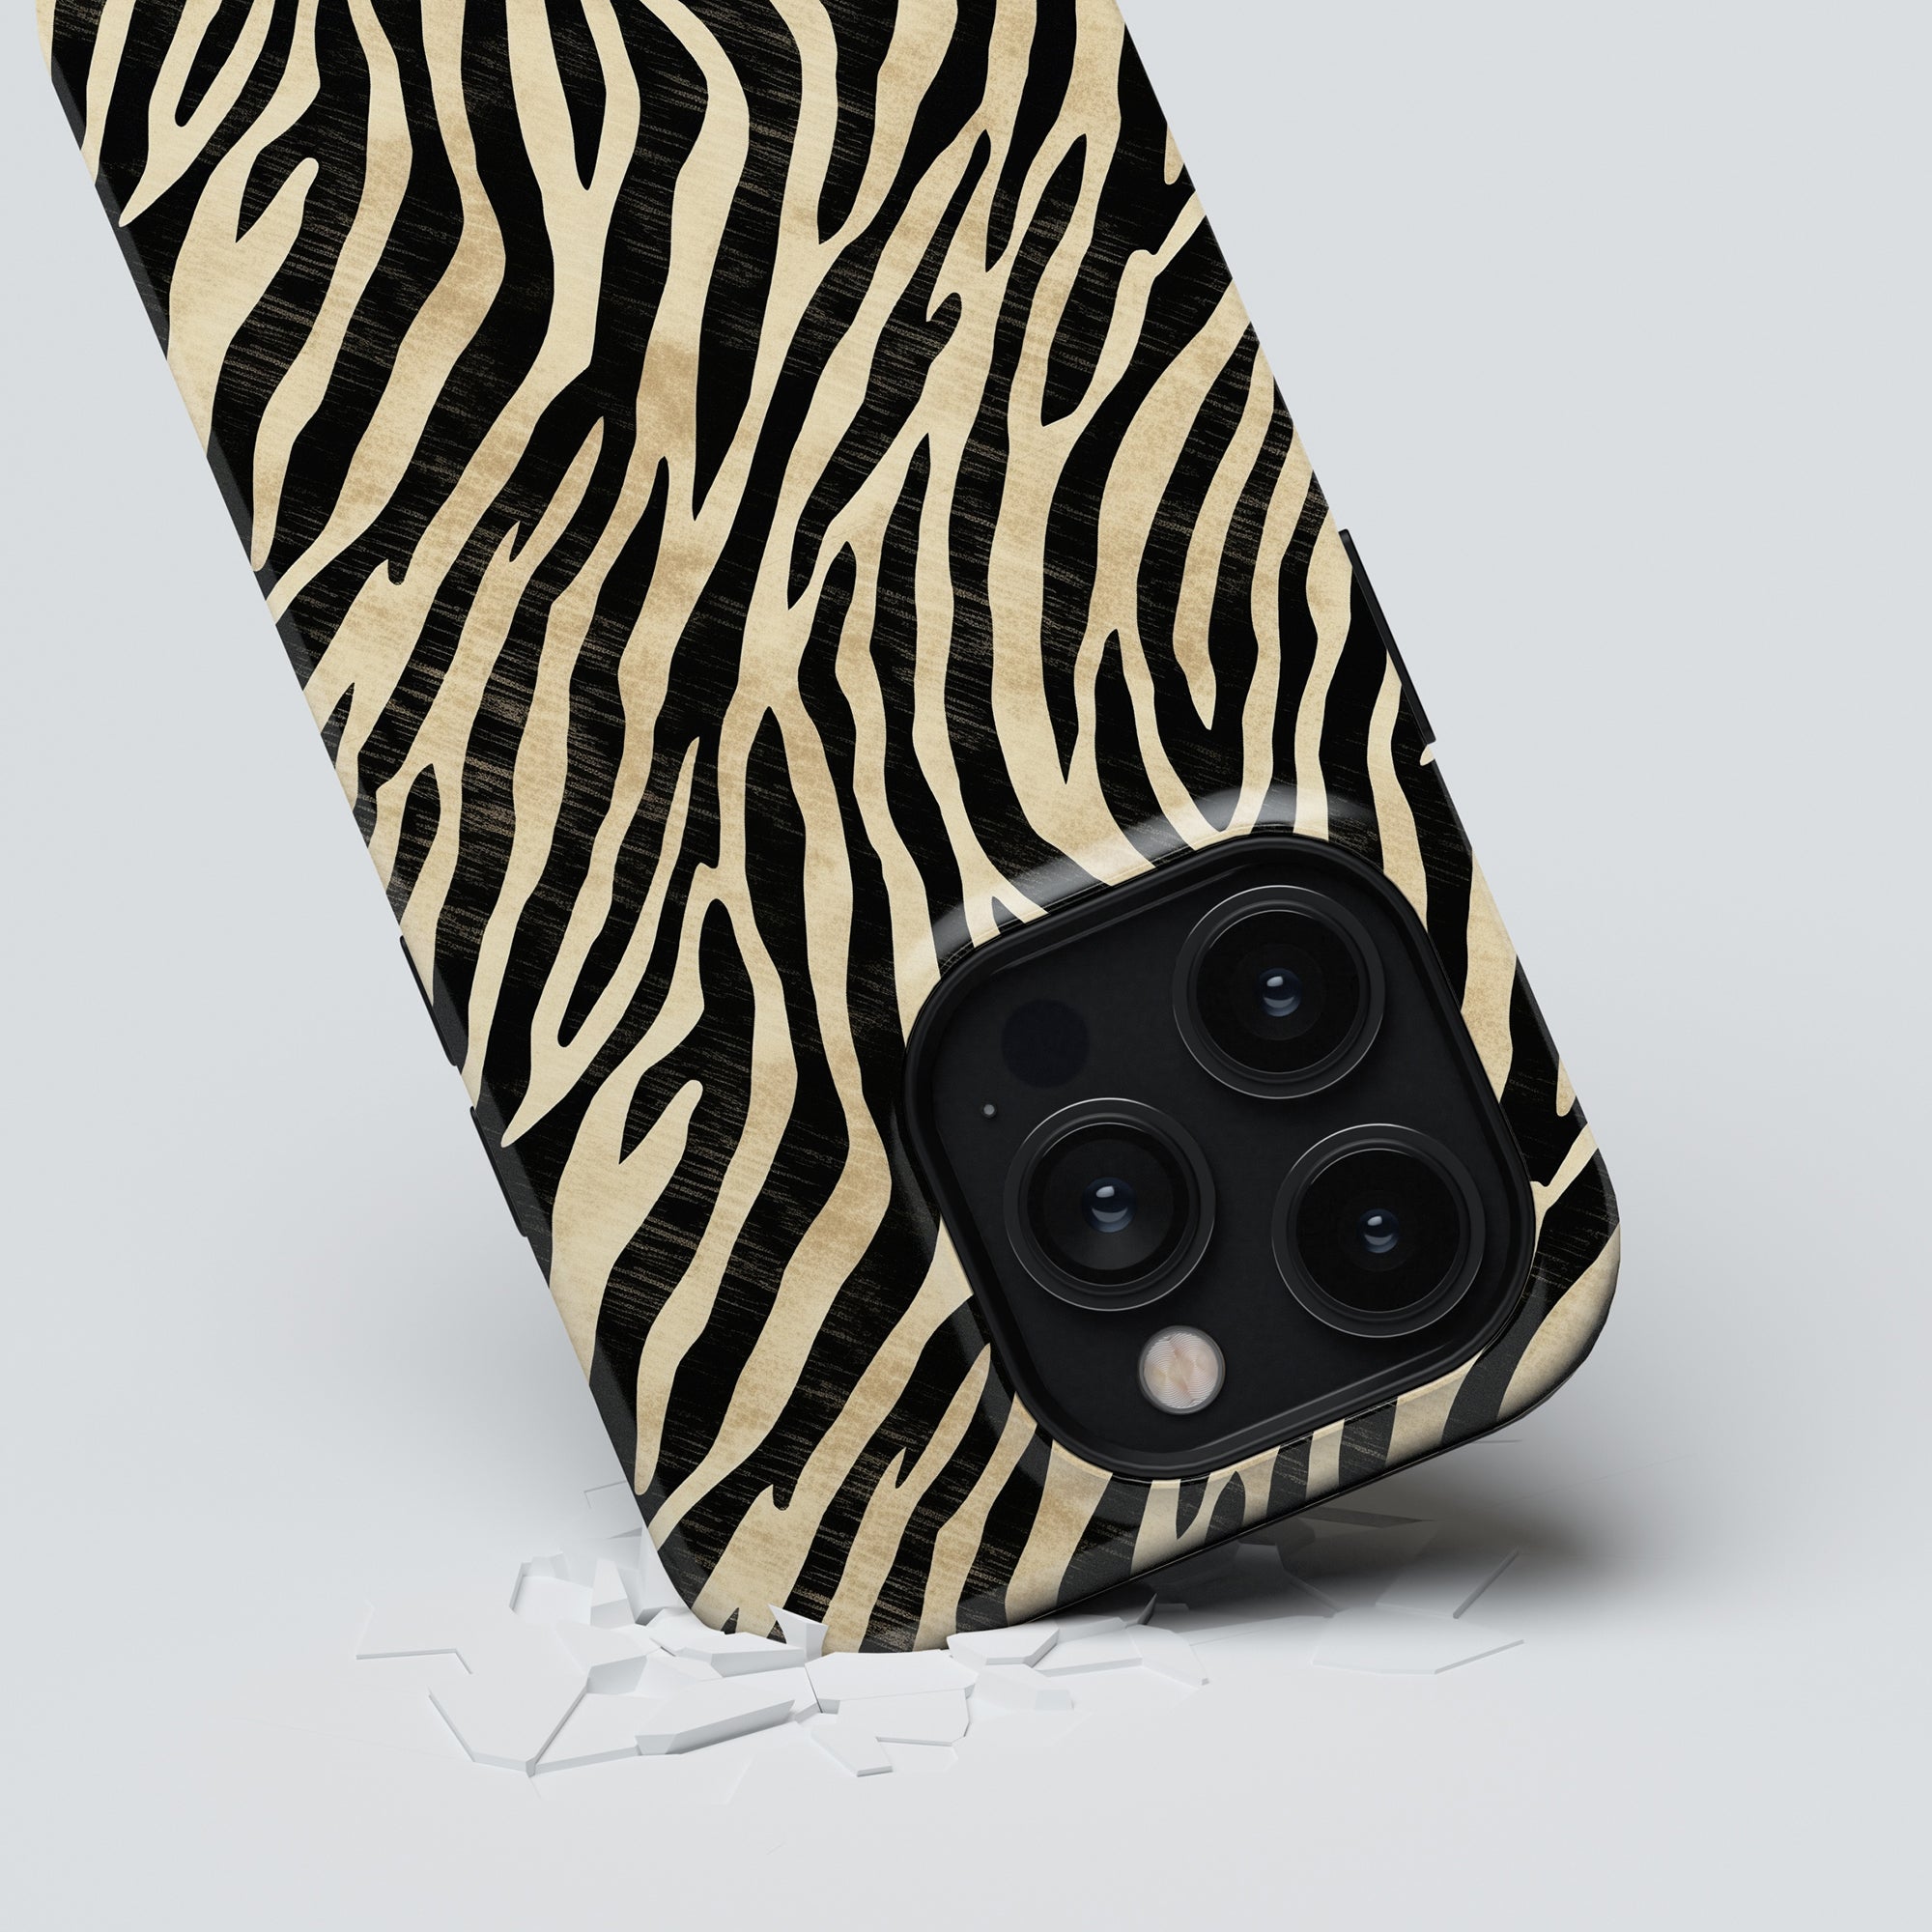 A smartphone with a zebra print case from the Zebra Collection lies on a surface, surrounded by shards of broken glass, showcasing the Marty - Tough Case's robust skydd.